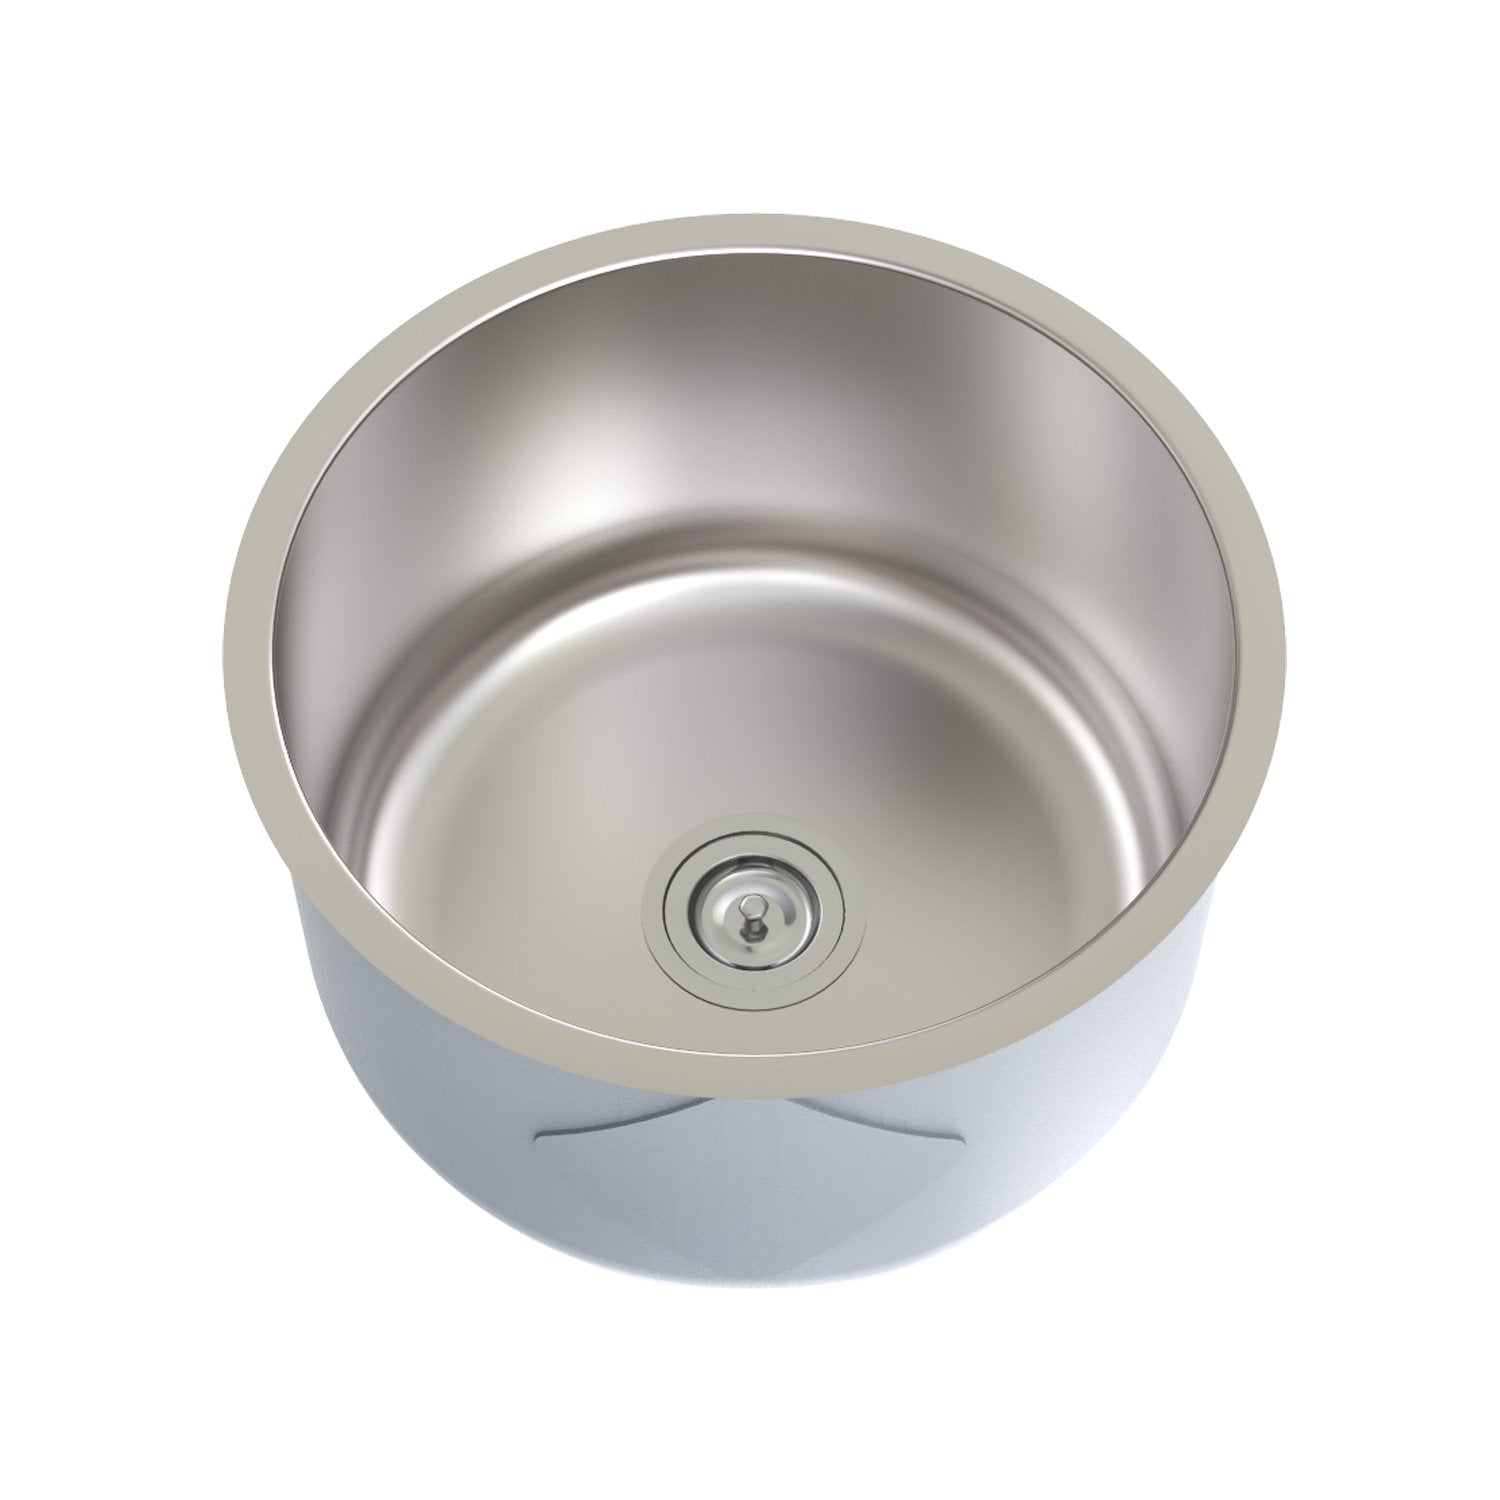 DAX Single Bowl Undermount Kitchen Sink, 20 Gauge Stainless Steel, Polished Finish , 16-1/2 x 16-1/2 x 7 Inches (KA-415)